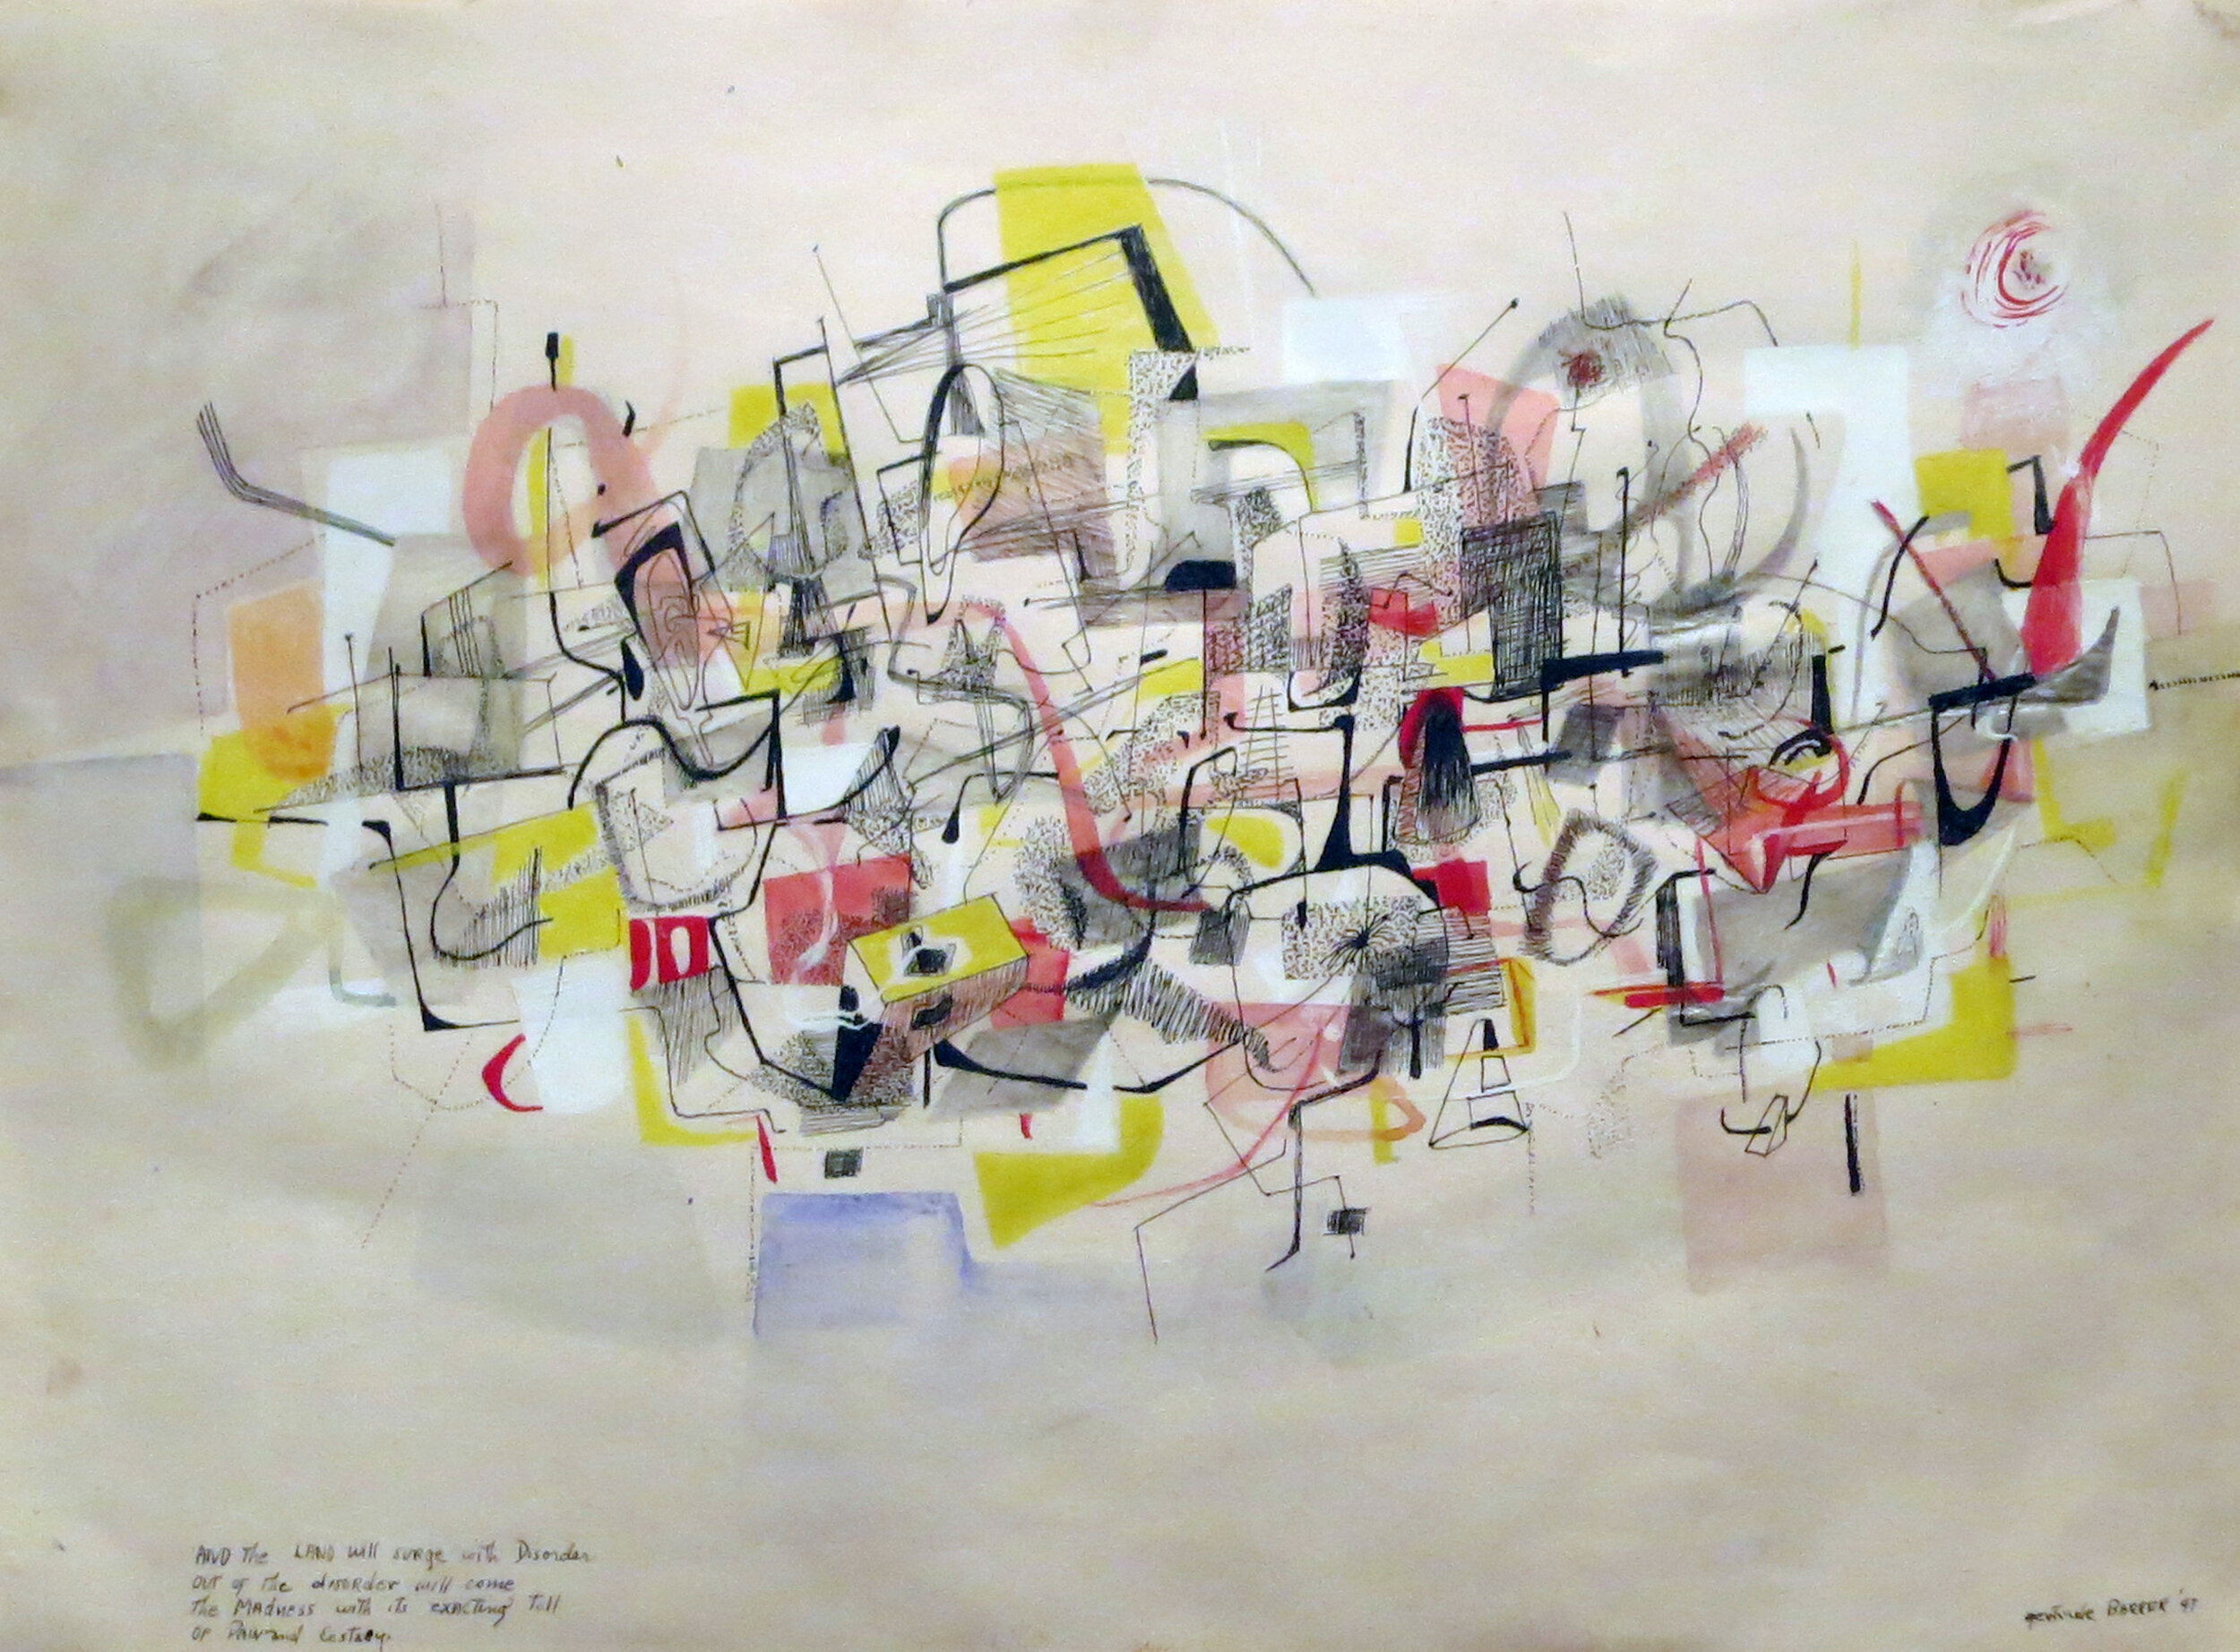 Abstract drawing of black, red, yellow, and white intertwining lines and shapes